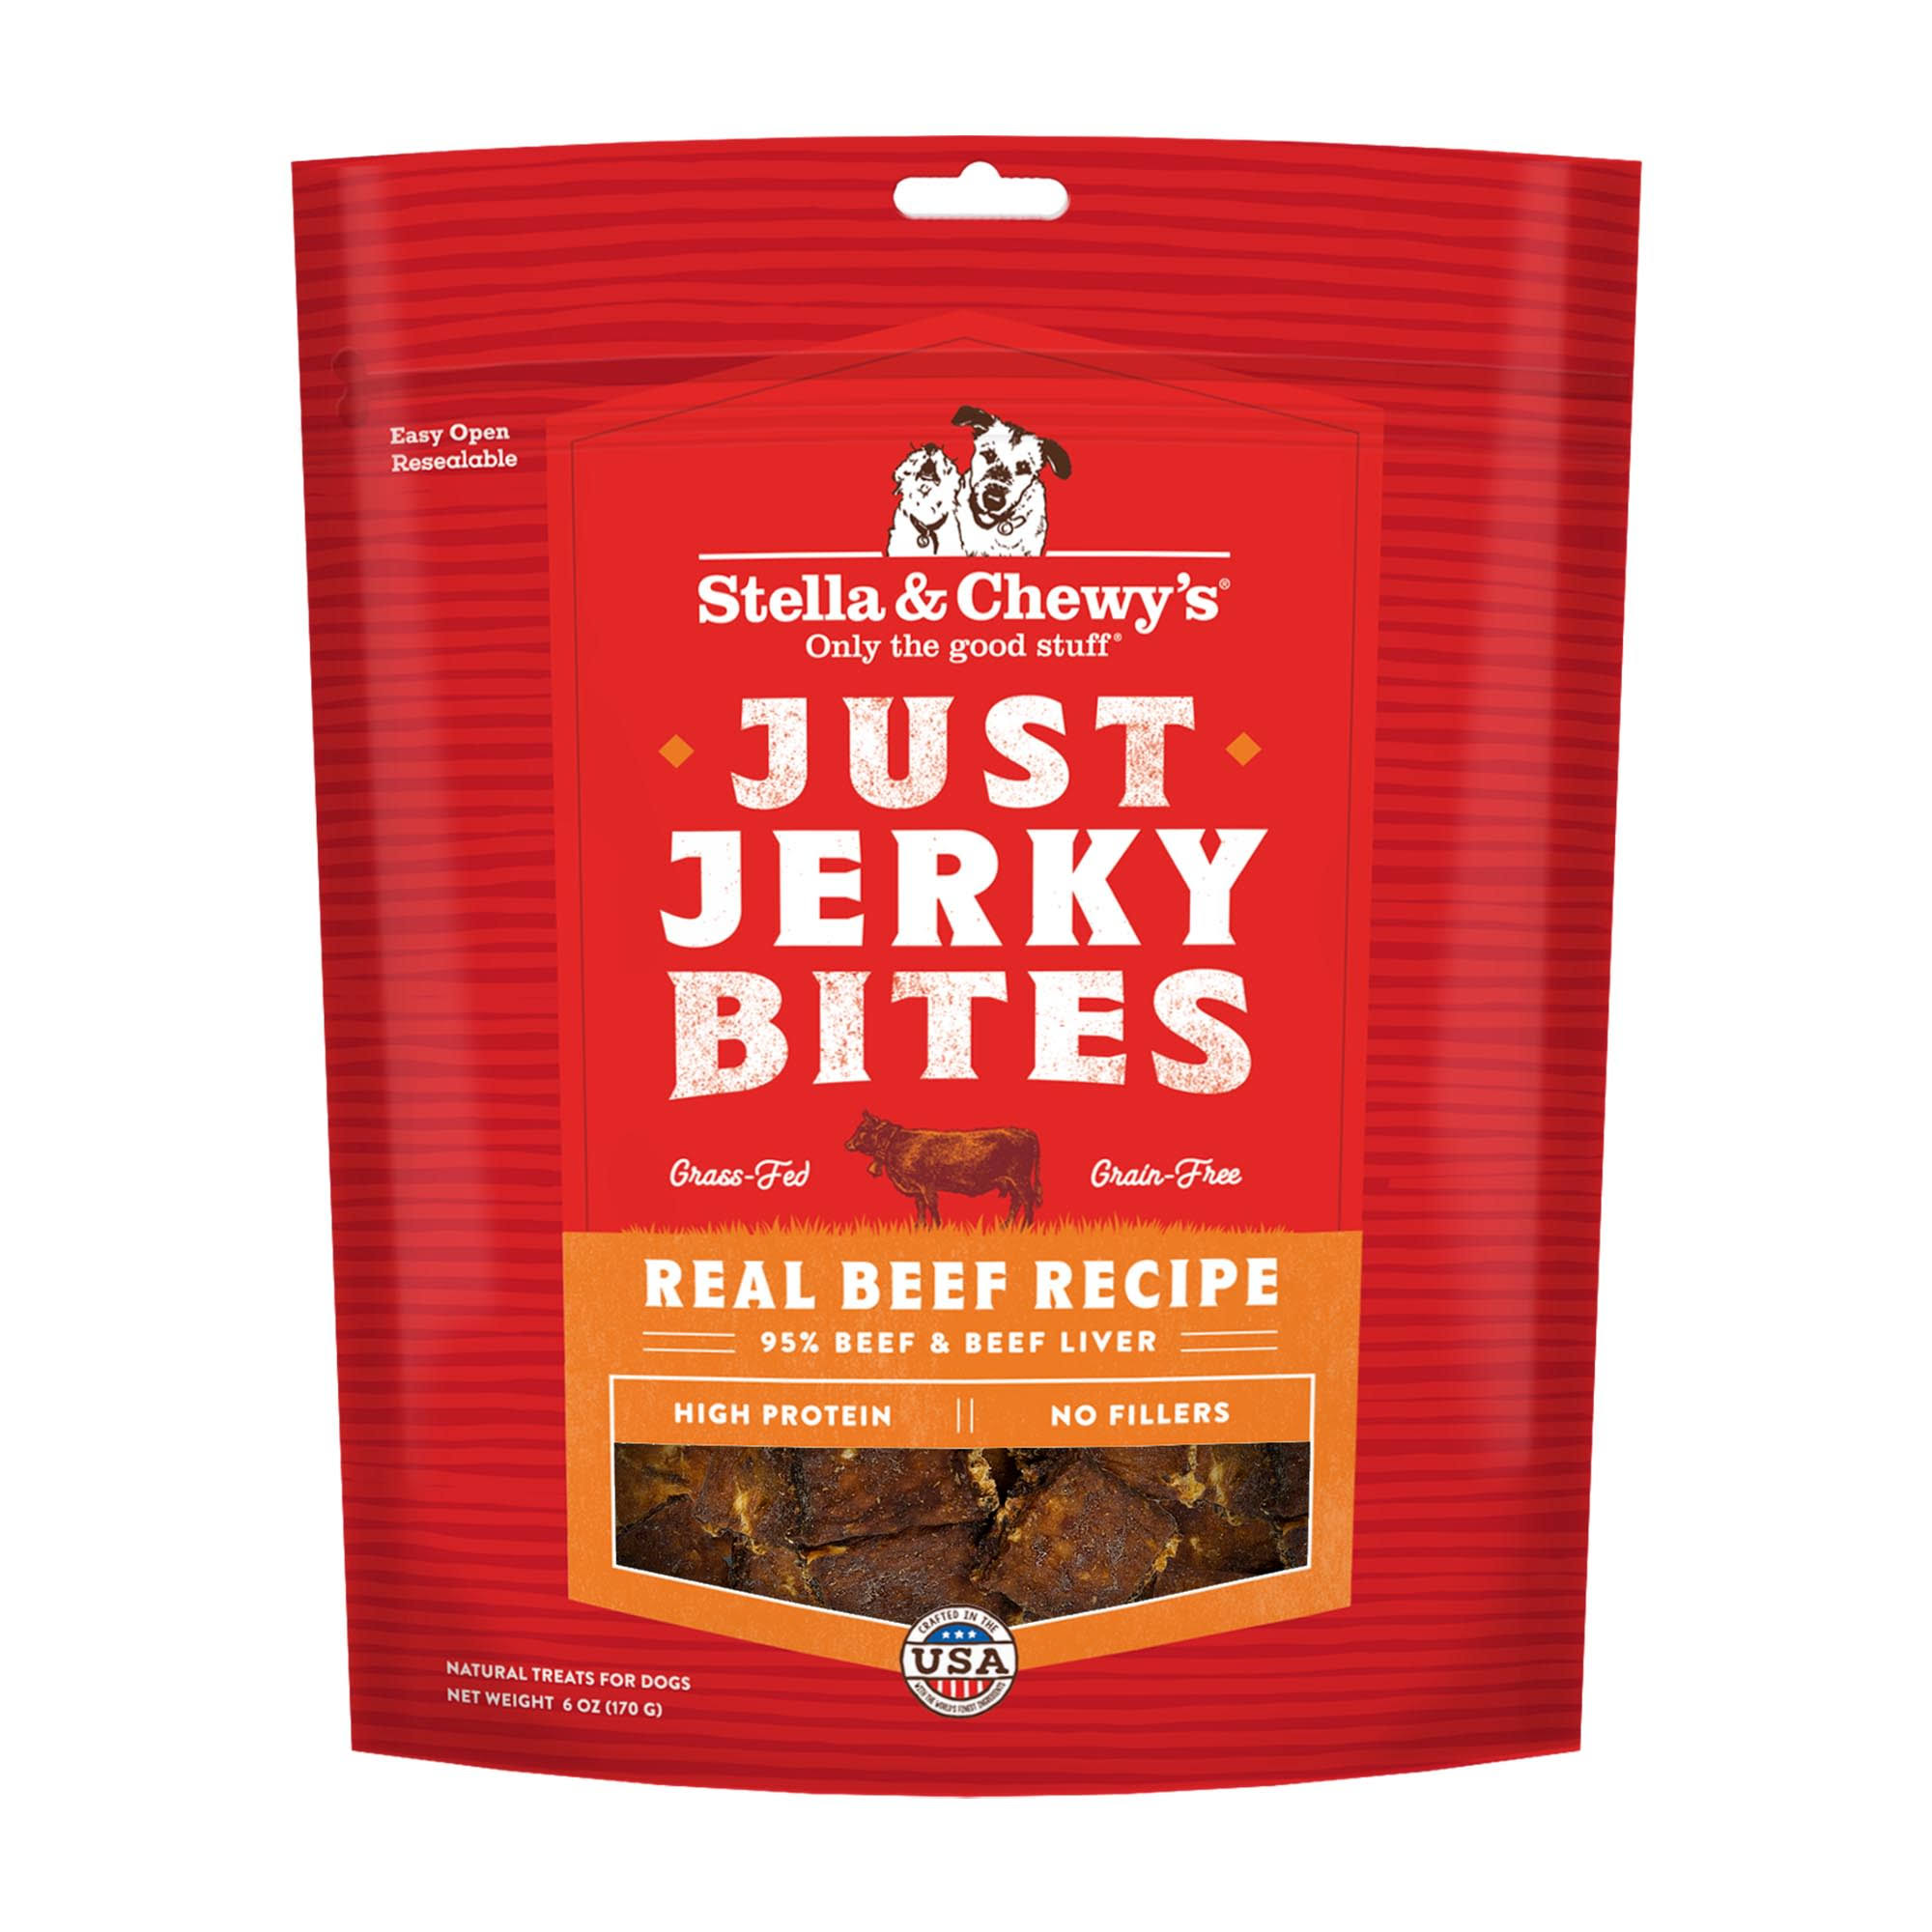 Stella & Chewy s Just Jerky Bites - Real Beef Recipe - 6 oz